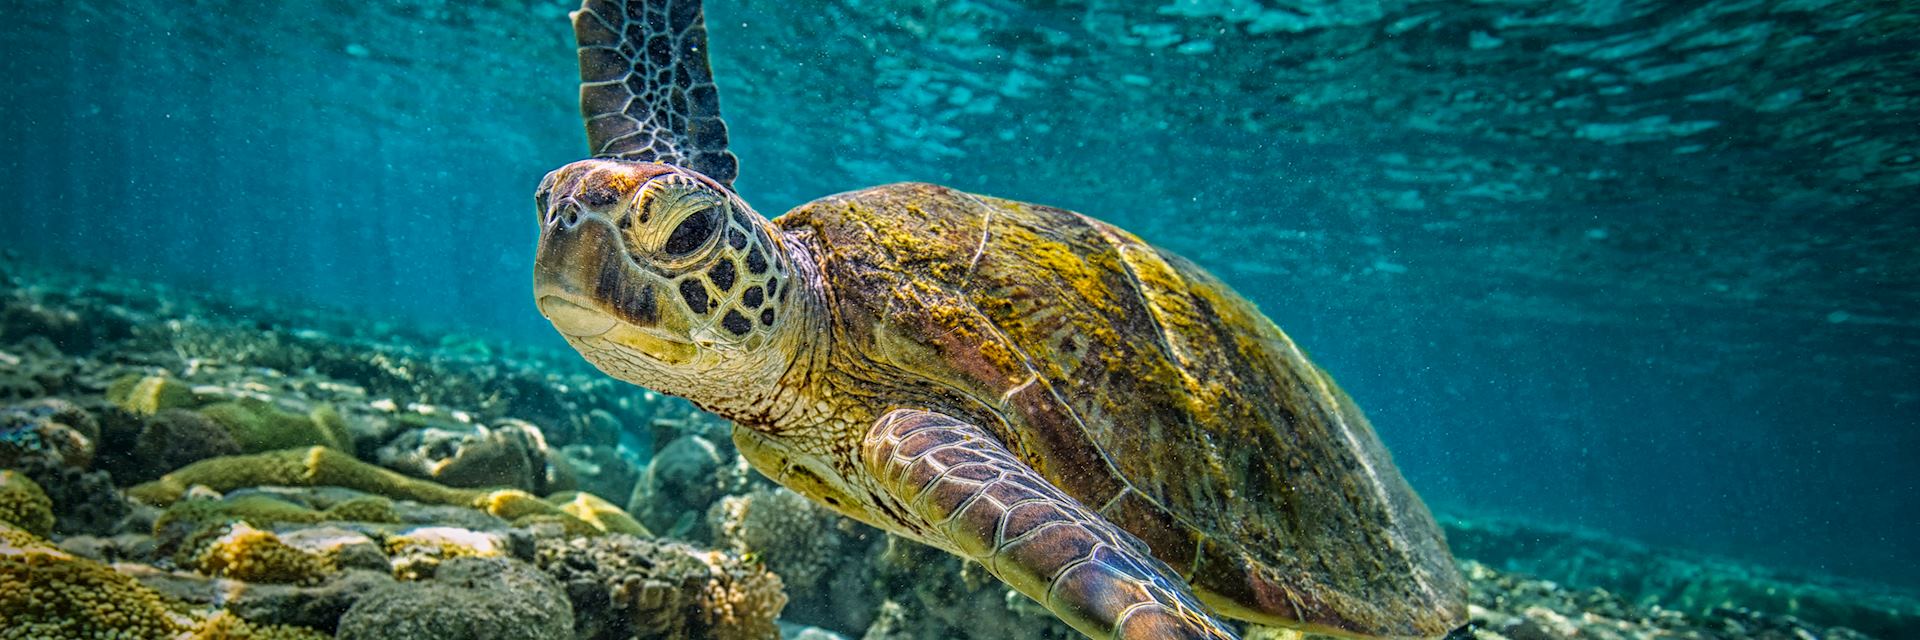 Green turtle on the Great Barrier Reef